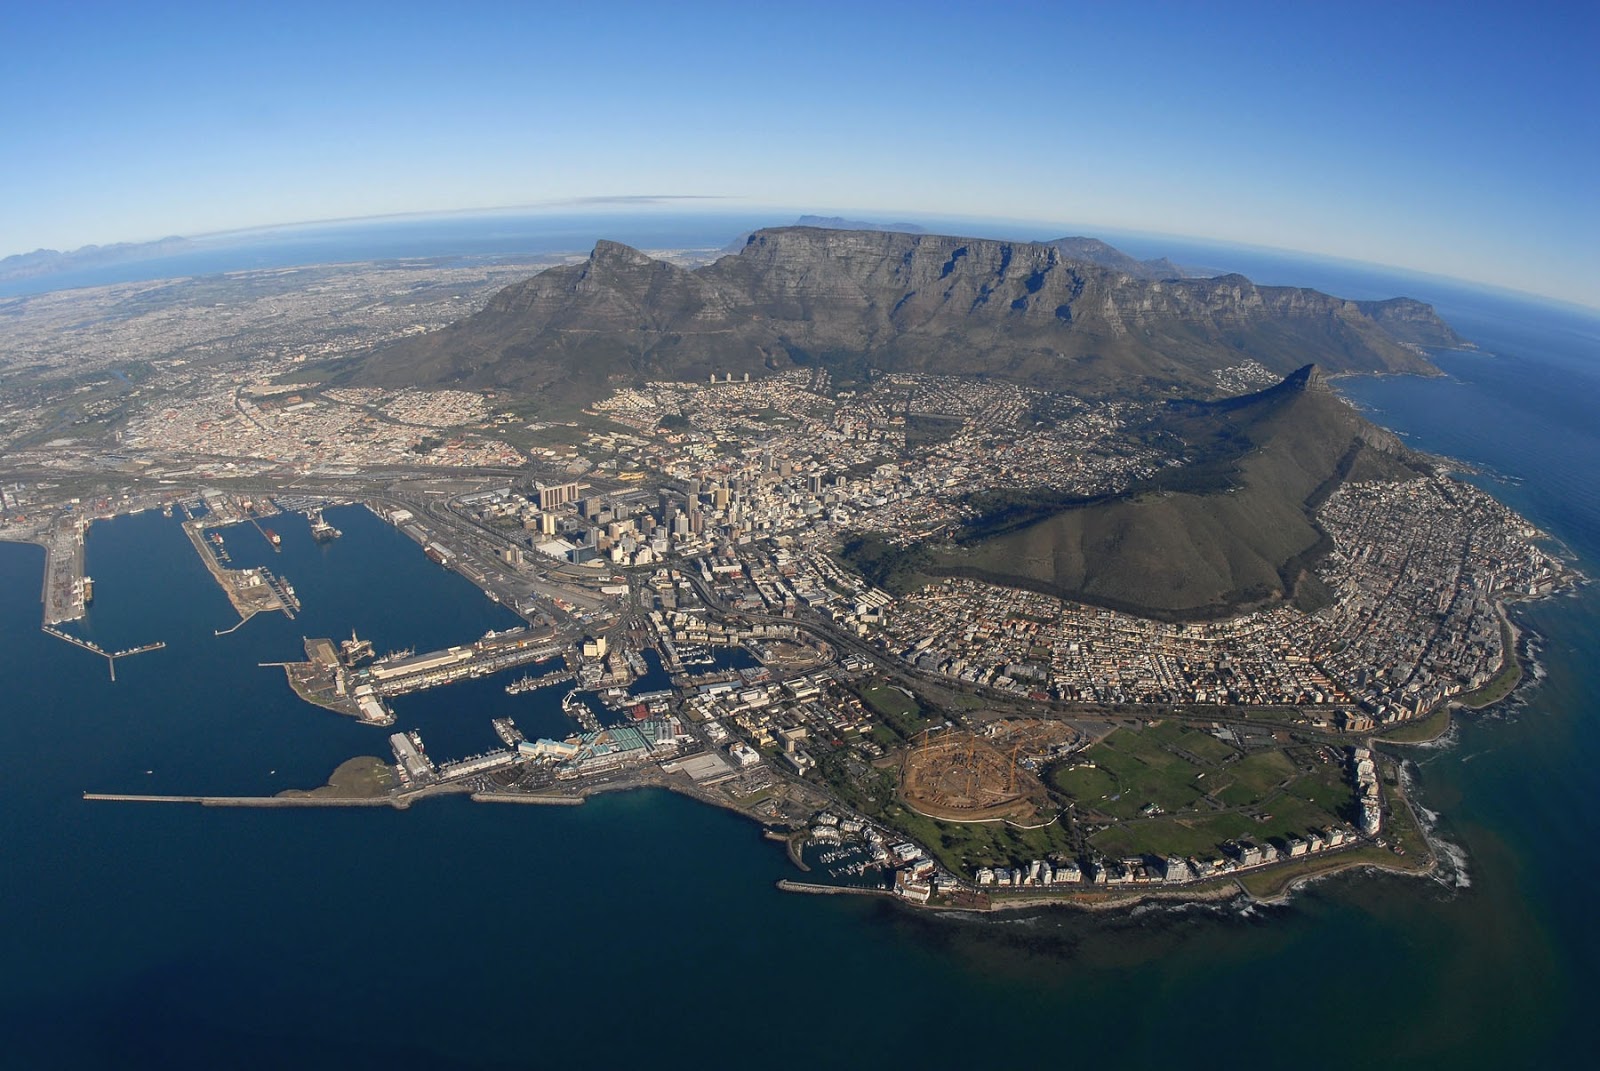 ENJOY THE BEAUTIFUL WORLD @ AM-PM: Cape Town City in South Africa